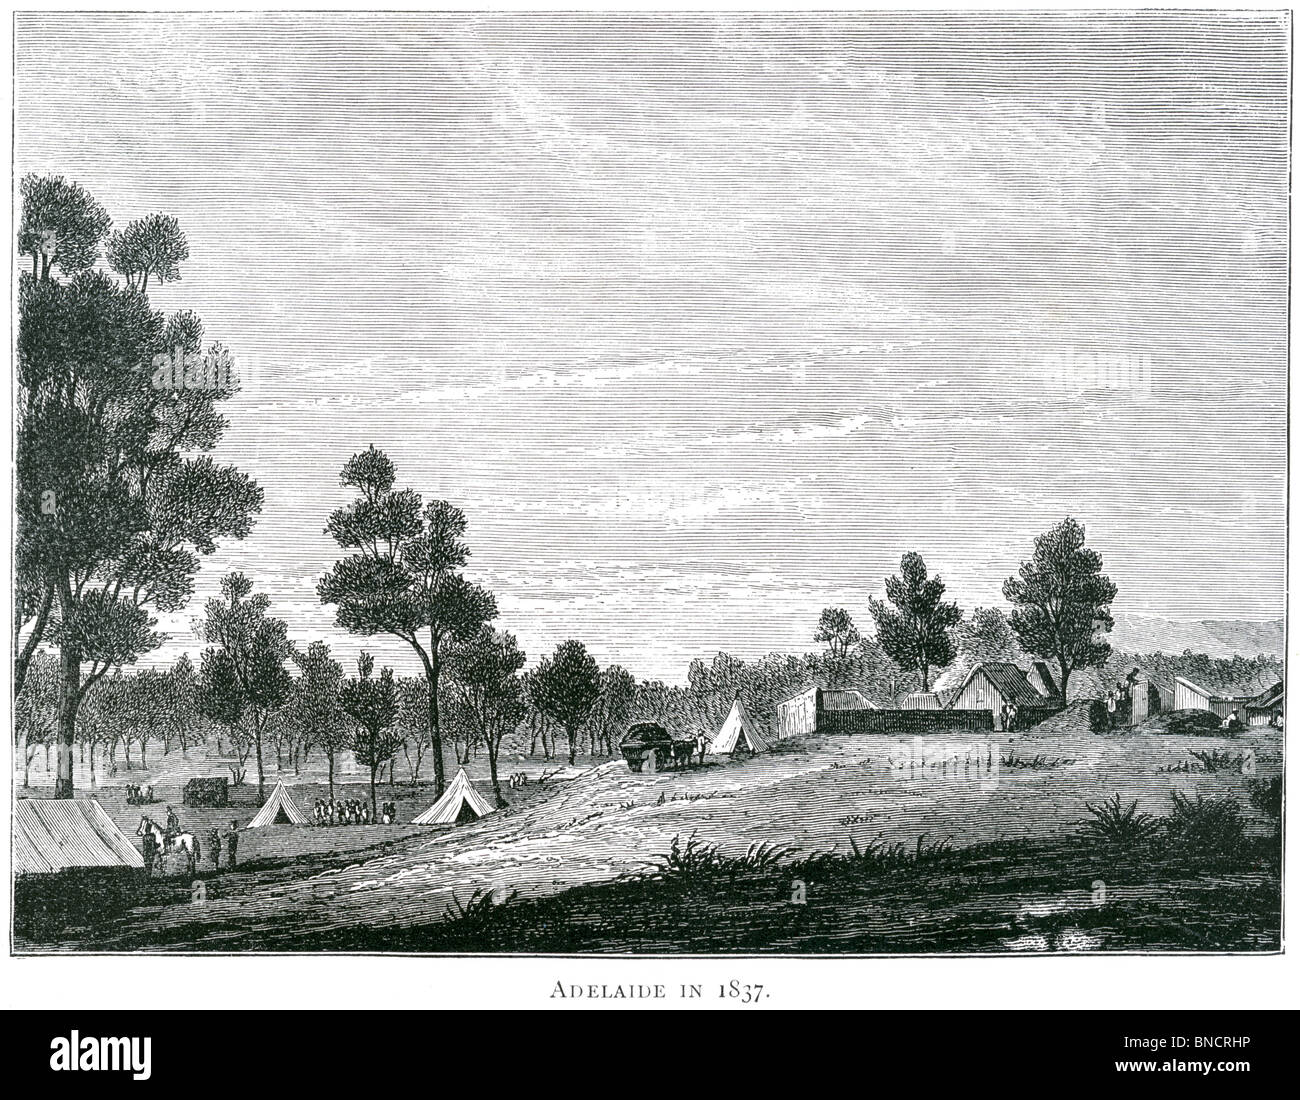 An engraving entitled 'Adelaide in 1837' - published in a book about Australia printed in 1886. Stock Photo